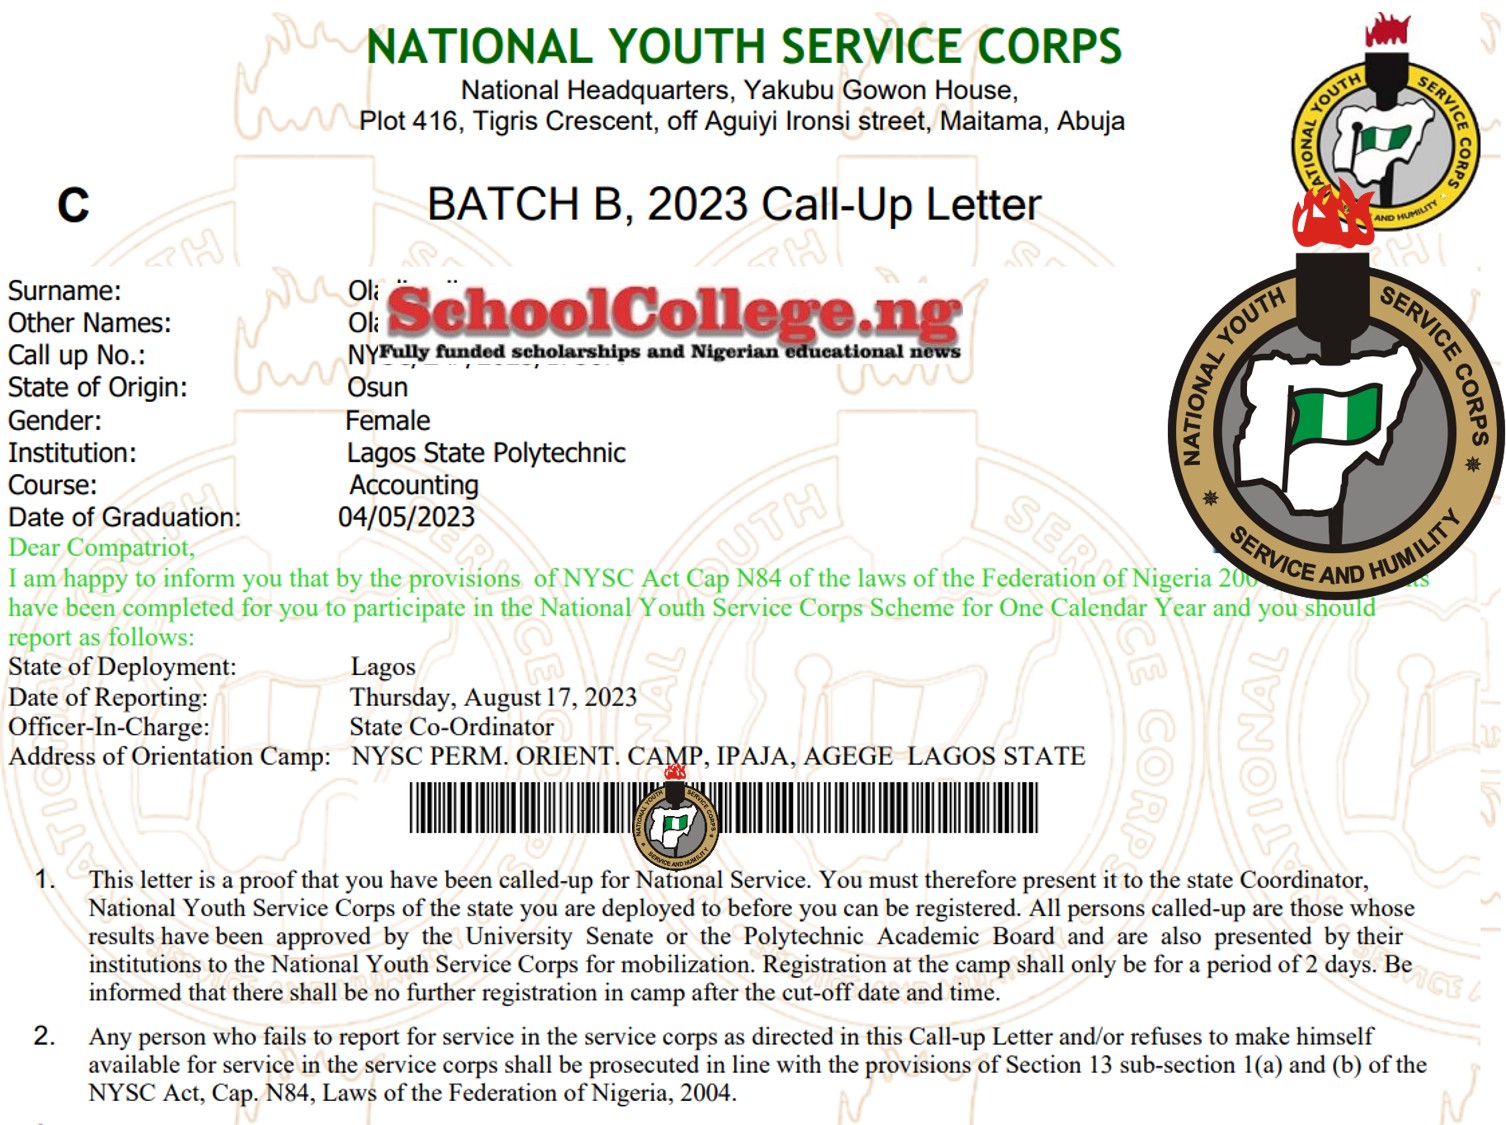 NYSC CALL-UP LETTER